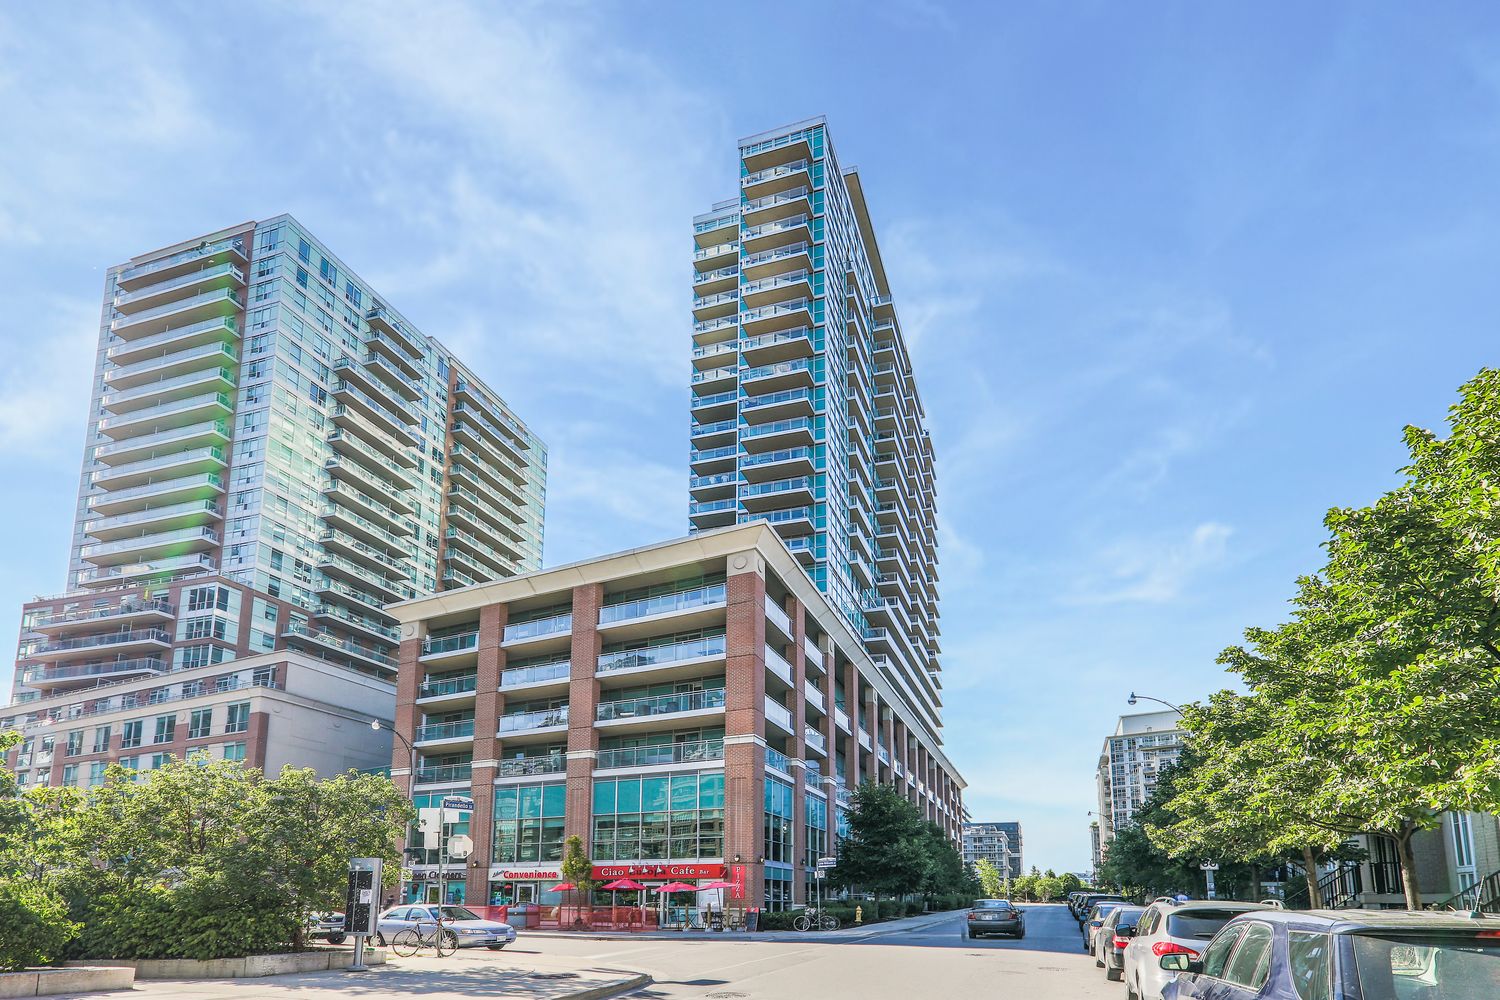 80 Western Battery Road. Zip Condos is located in  West End, Toronto - image #1 of 8